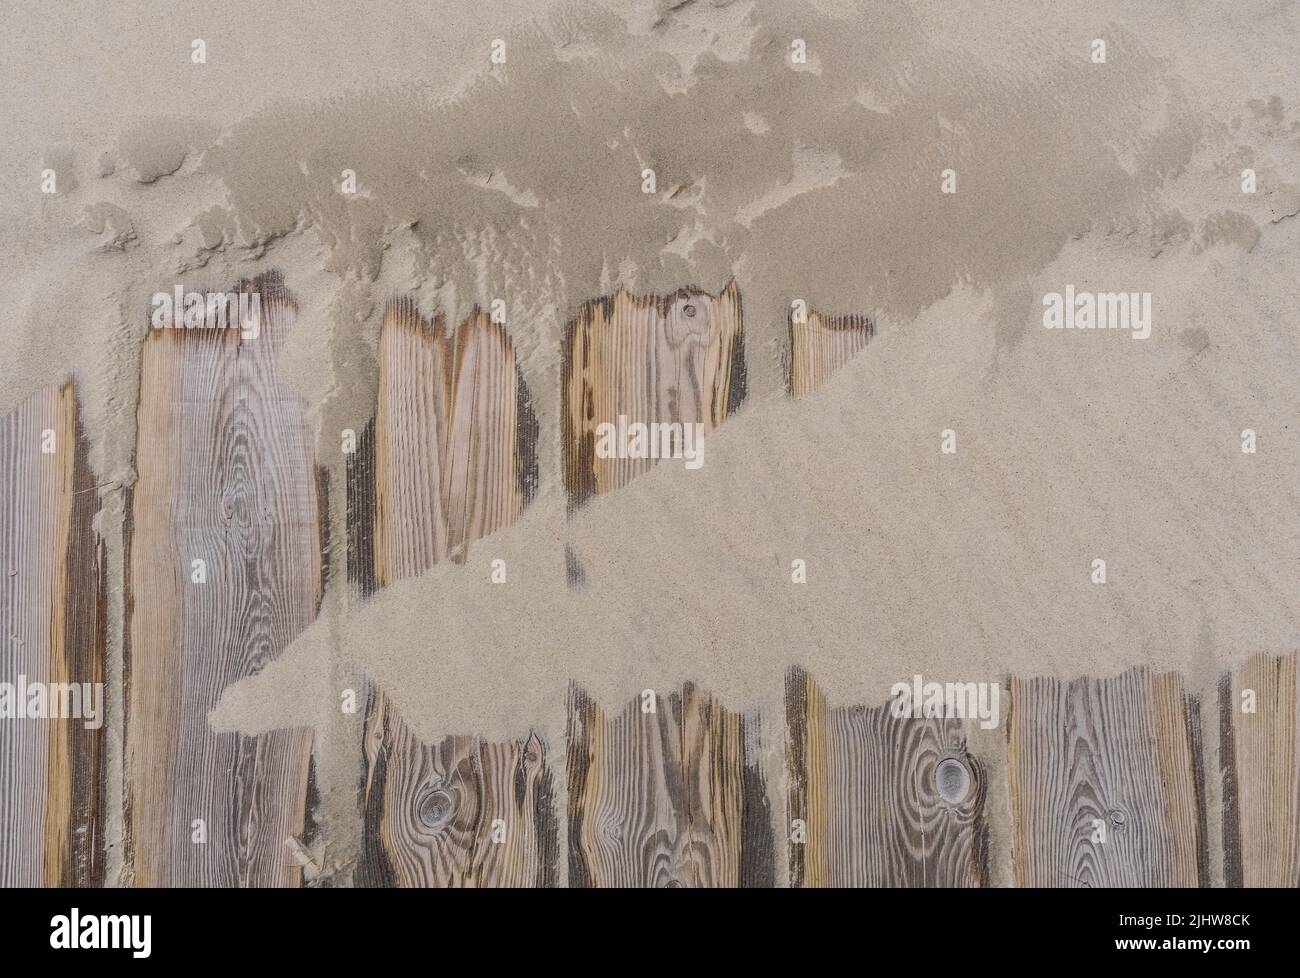 flooring detail of a path on a windy beach Stock Photo